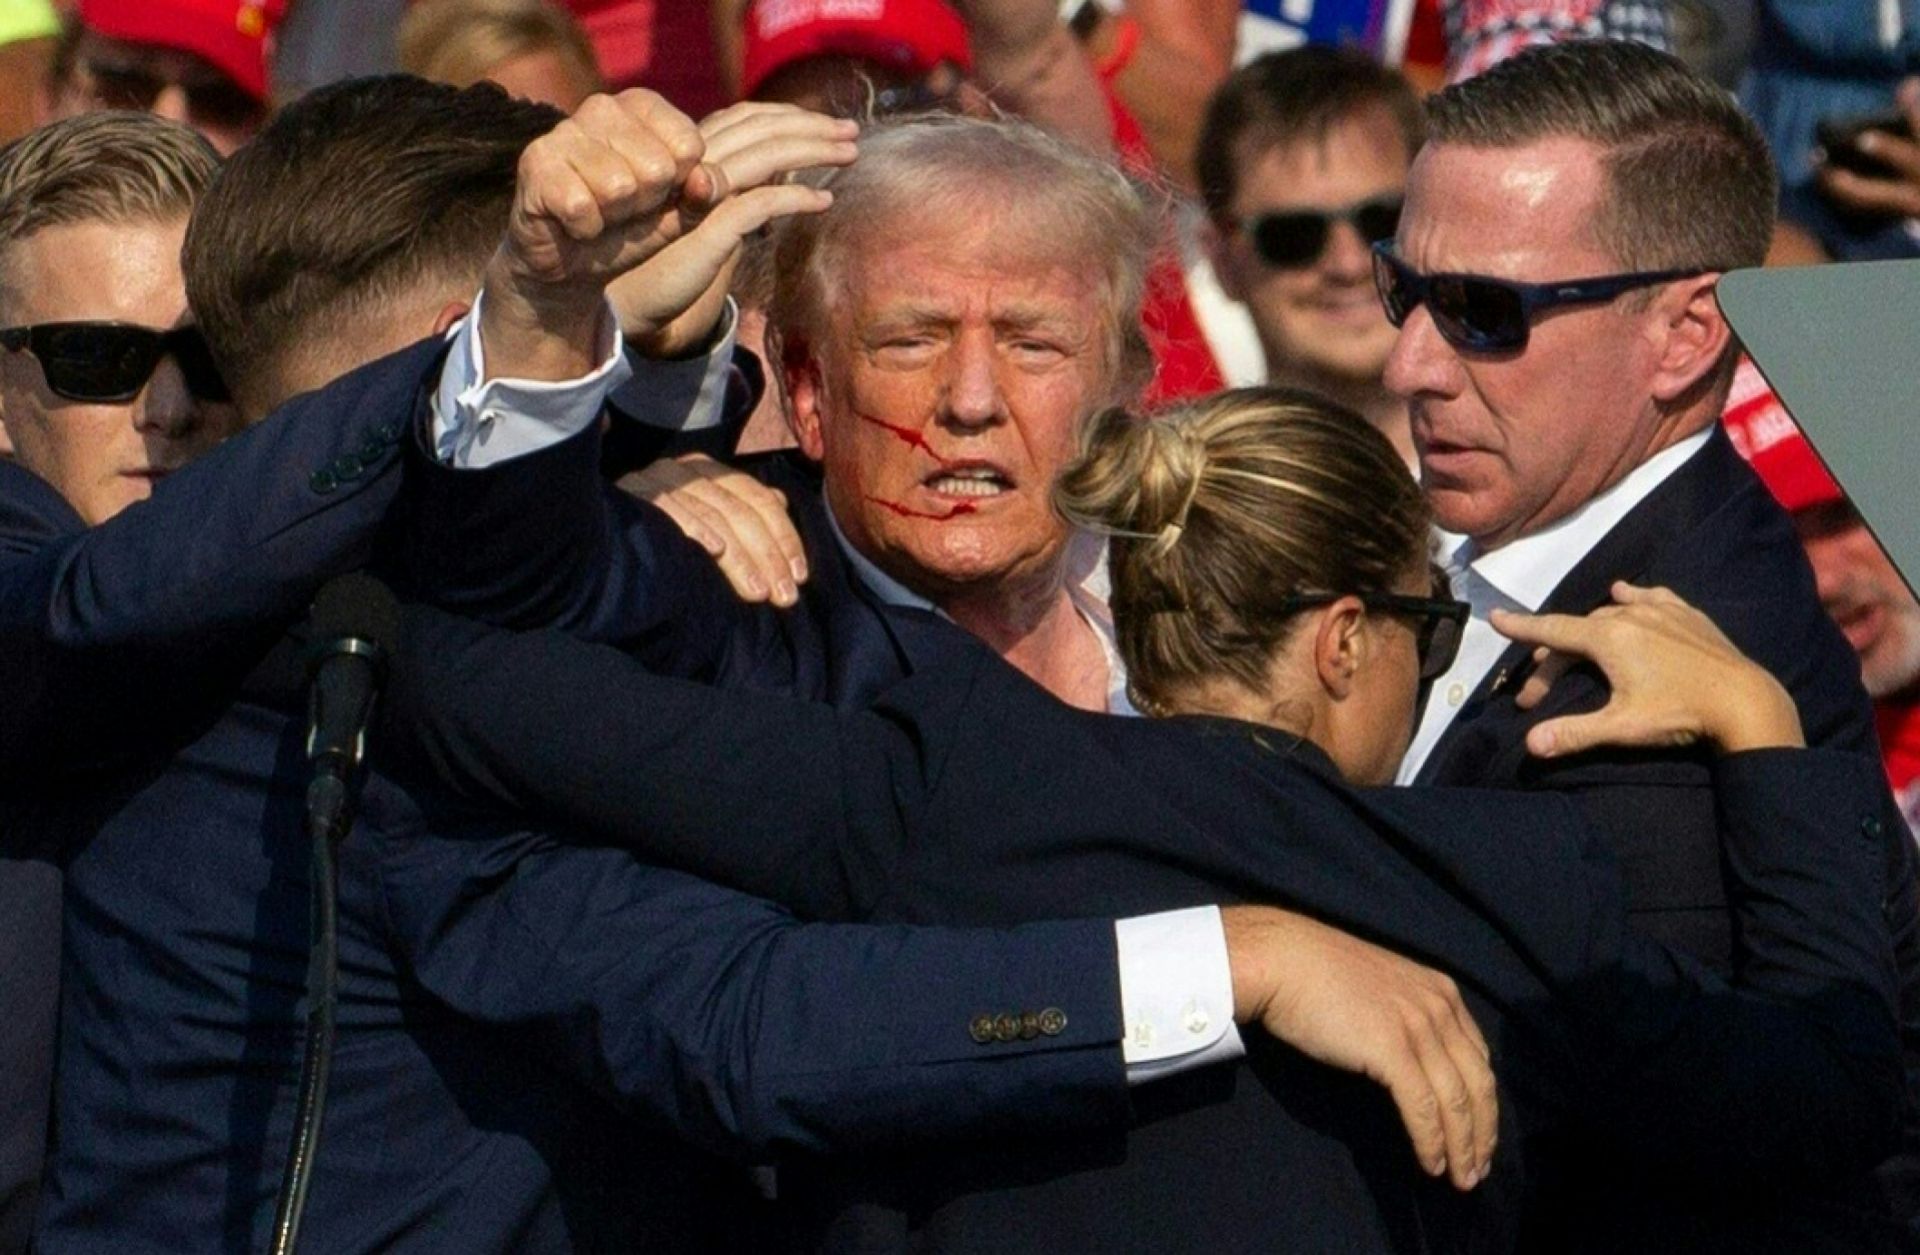 Republican presidential candidate Donald Trump with blood on his face surrounded by secret service agents as he is taken off the stage at a July 13 campaign event in Butler, Pennsylvania.